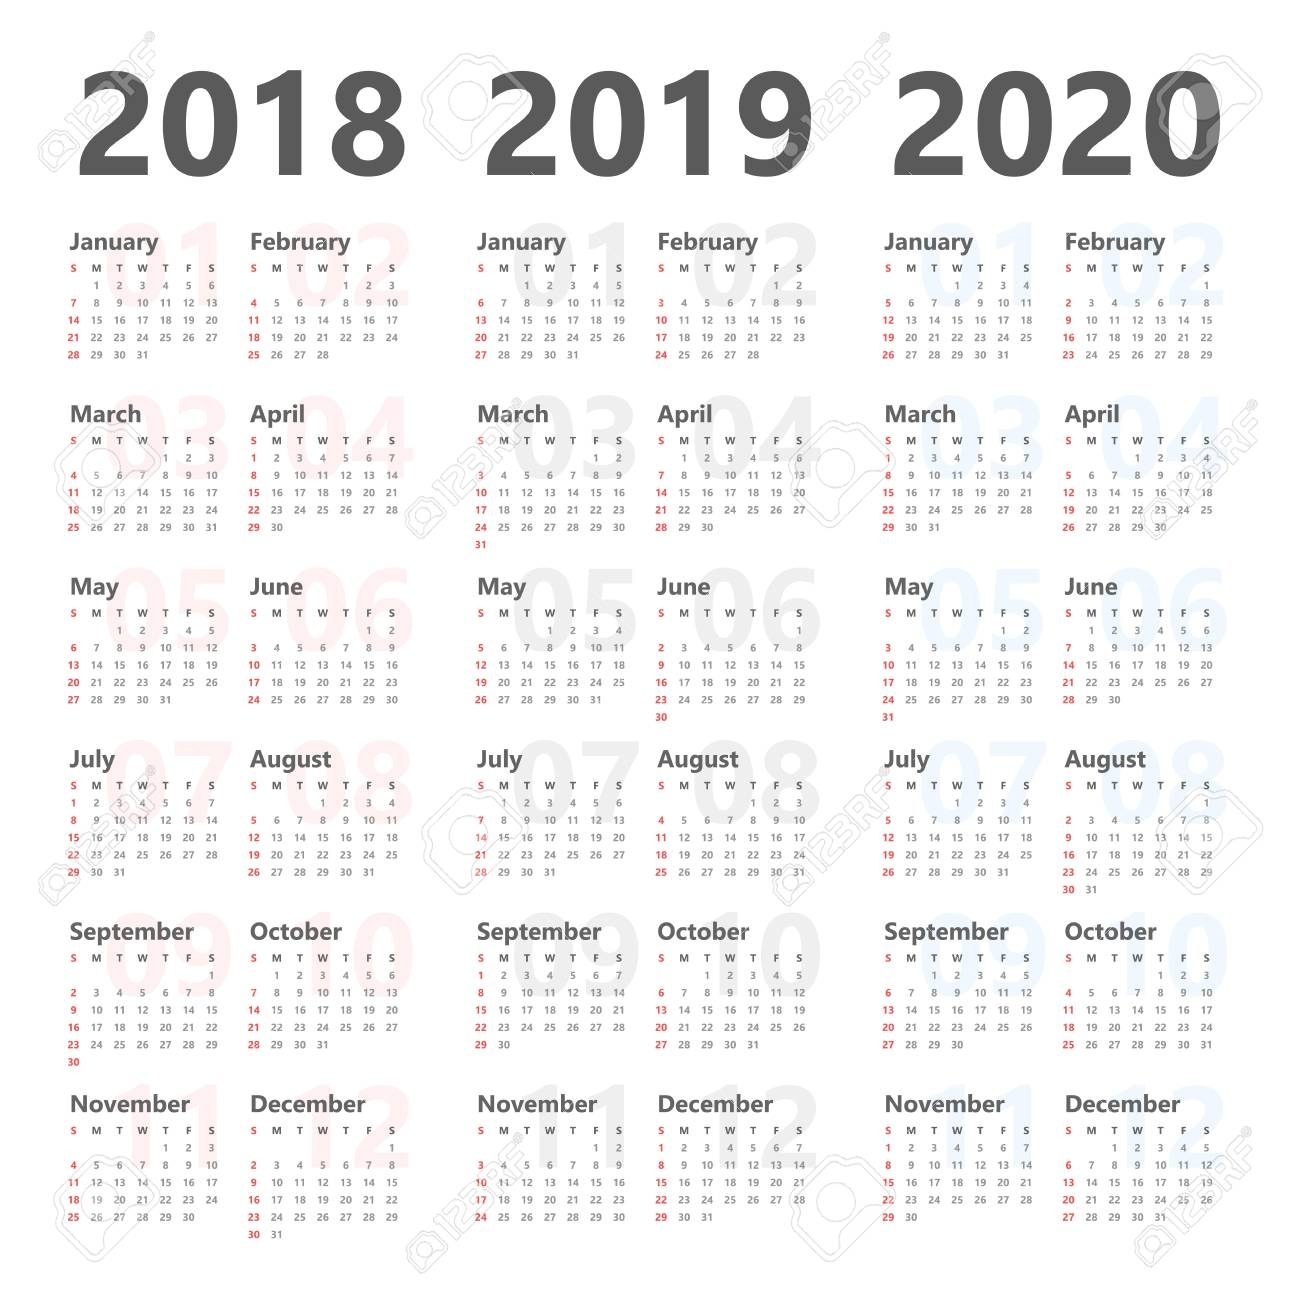 Yearly Calendar Template For 2018 To 2020. Royalty Free Cliparts Free 5 Year Calendar Template